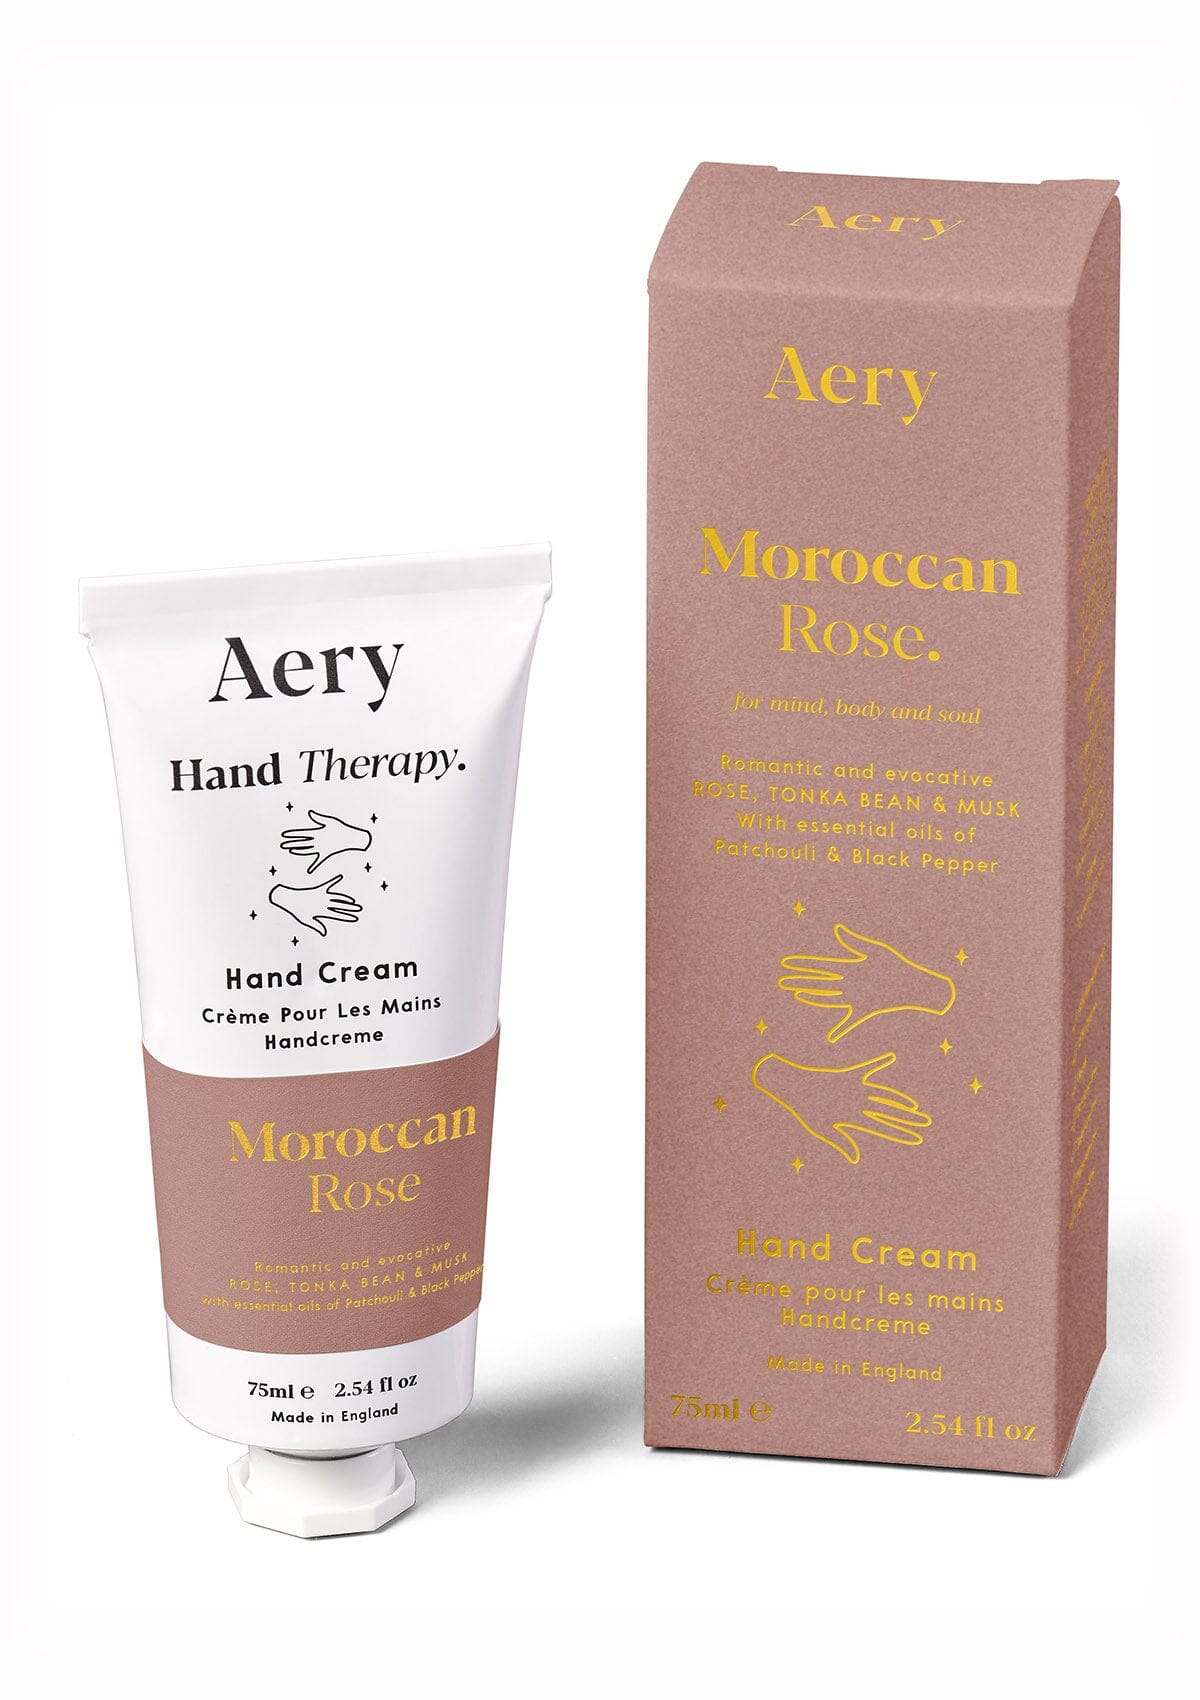 Aubergine Moroccan Rose hand cream displayed next to product packaging on white background 